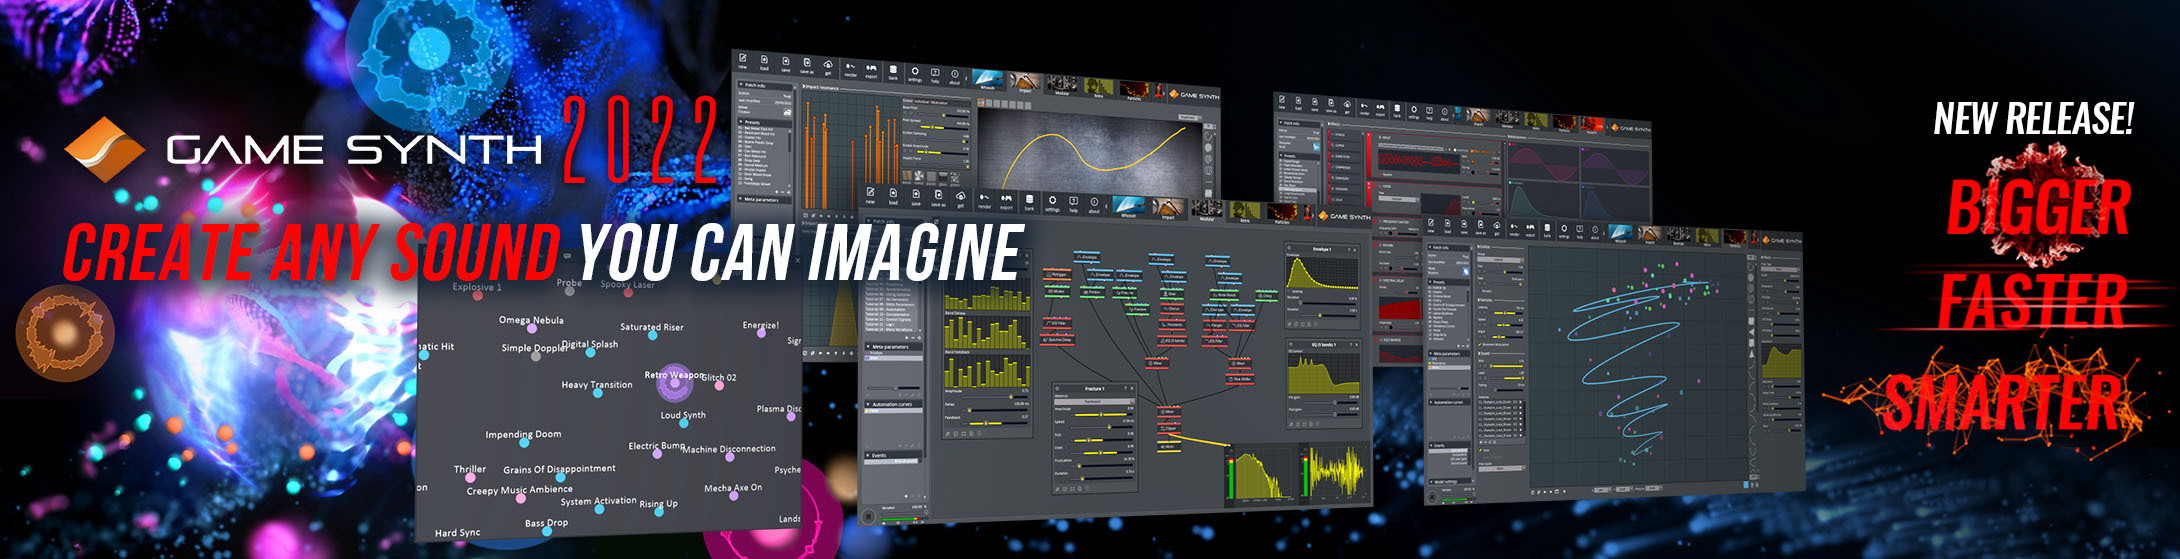 GameSynth | The ultimate sound design tool for games and movies